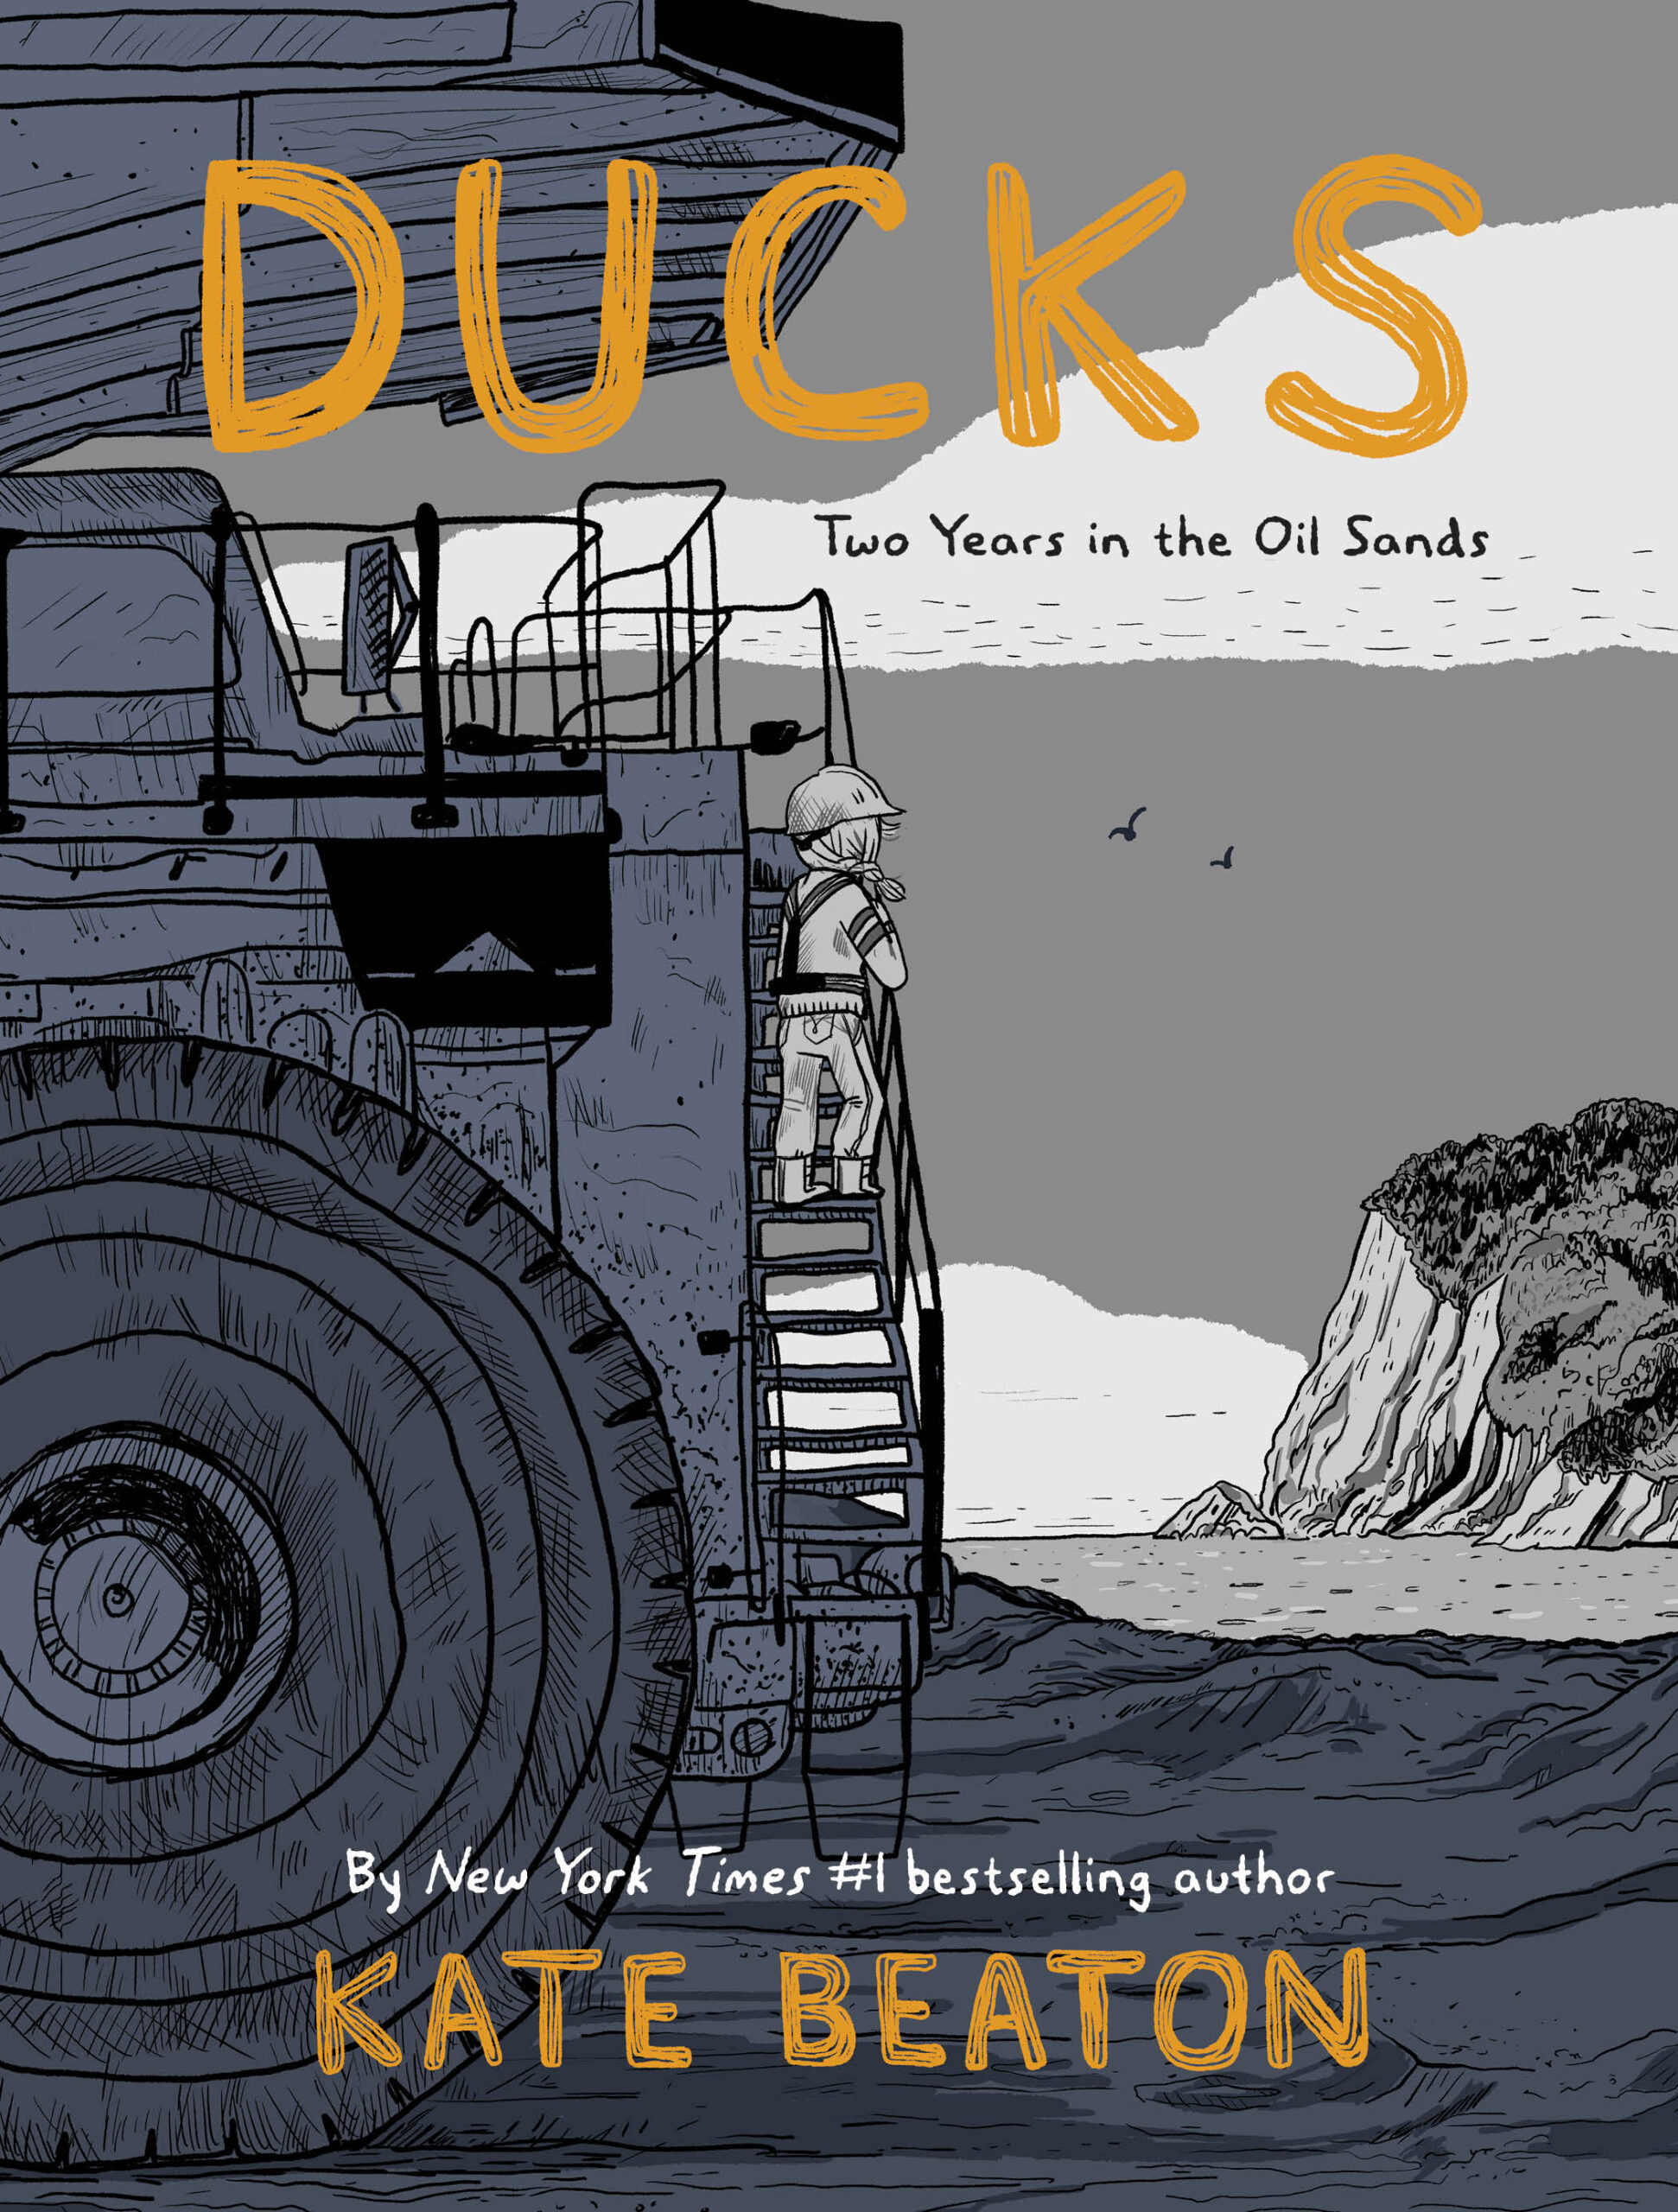 Cover of "Ducks: Two Years in the Oil Sands," a new memoir by Kate Beaton